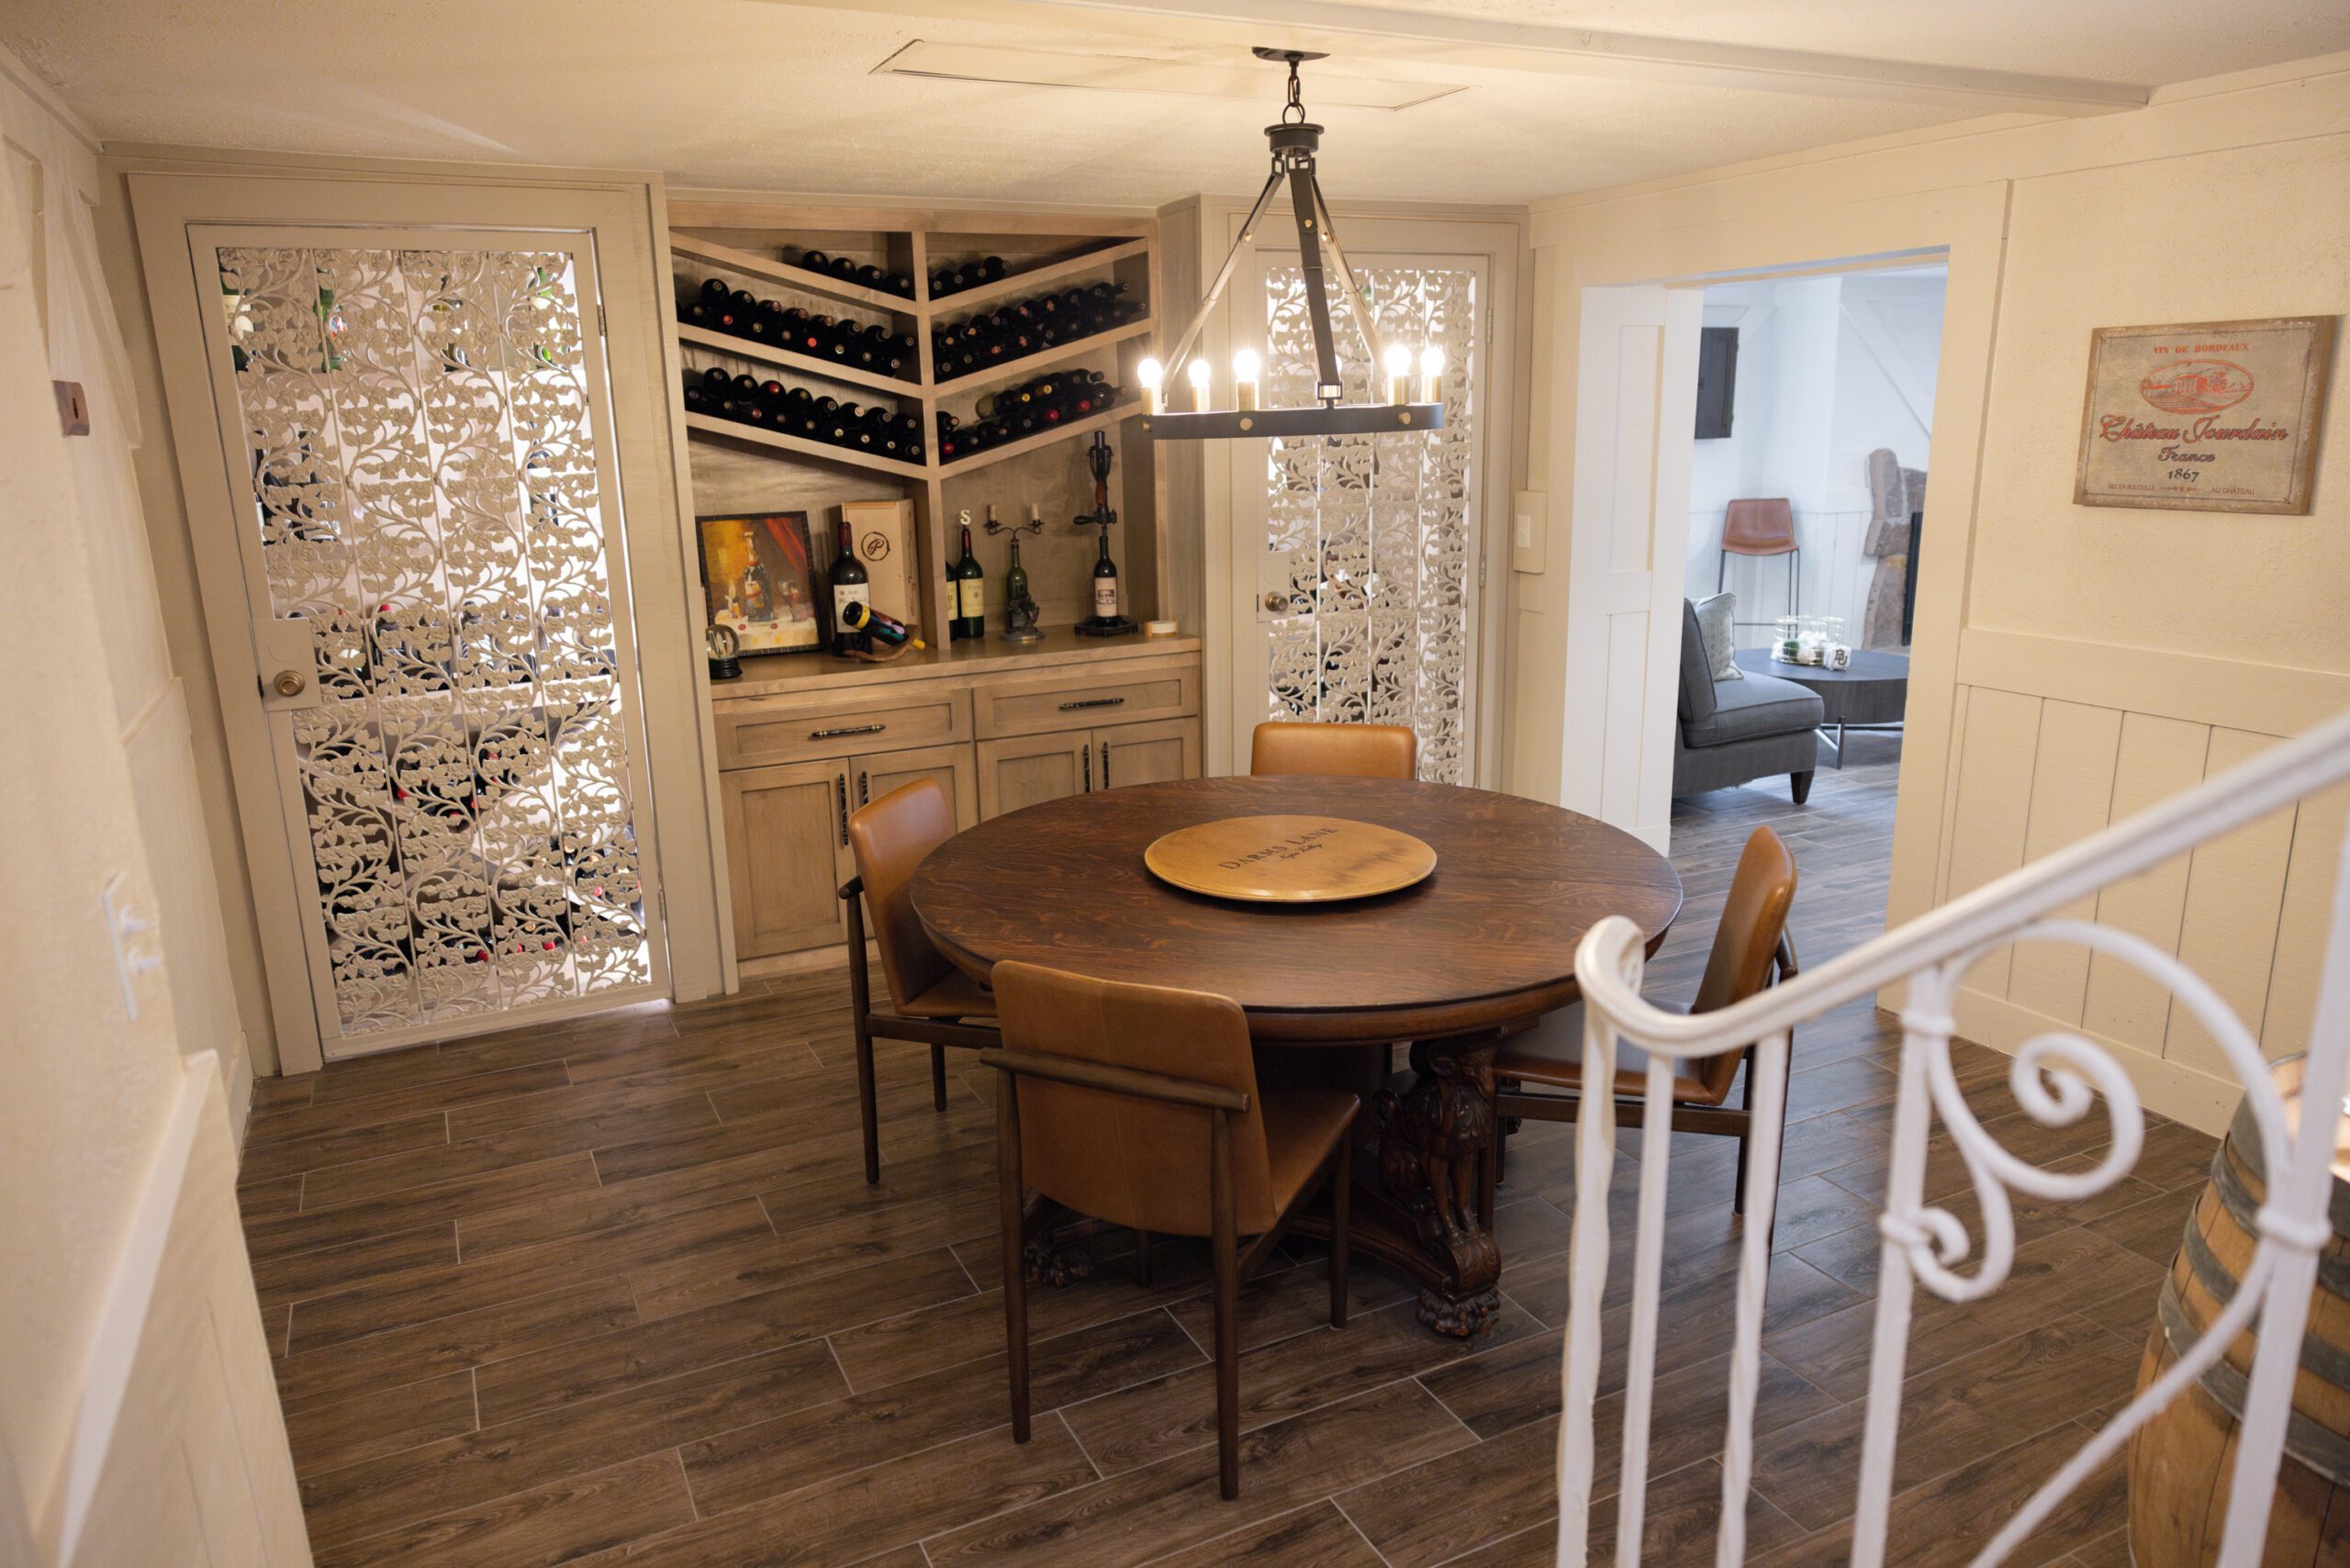 basement wine cellar in 1930s home renovation in Tulsa OK by Kirkendall Design, full service interior design firm